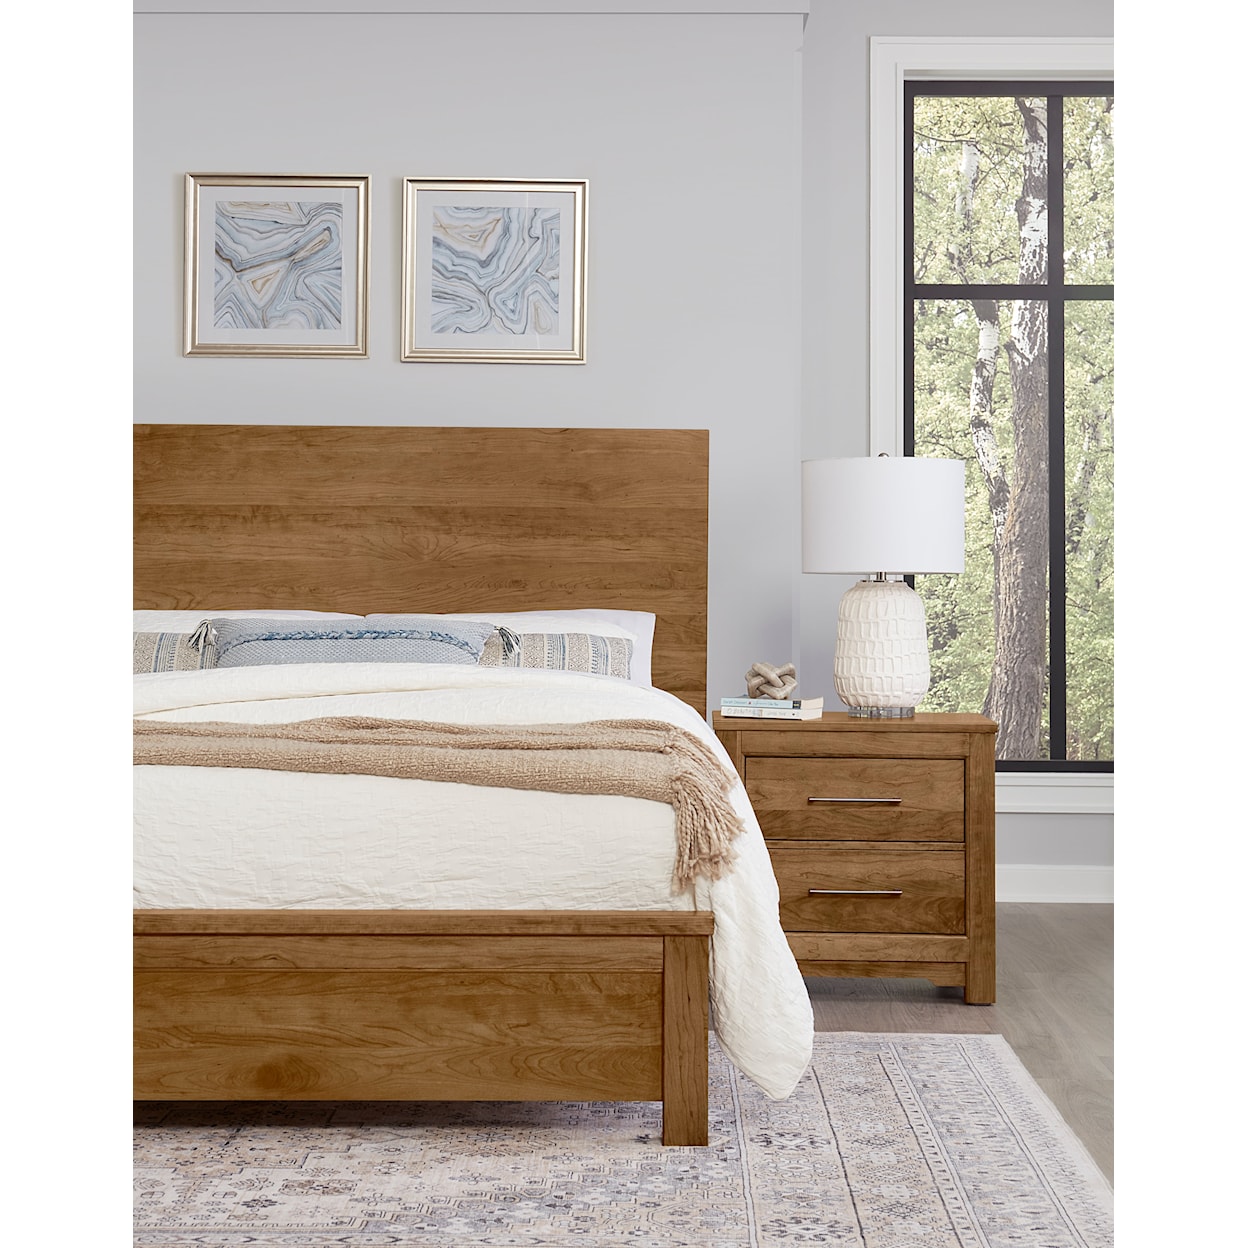 Artisan & Post Crafted Cherry Queen Plank Bed